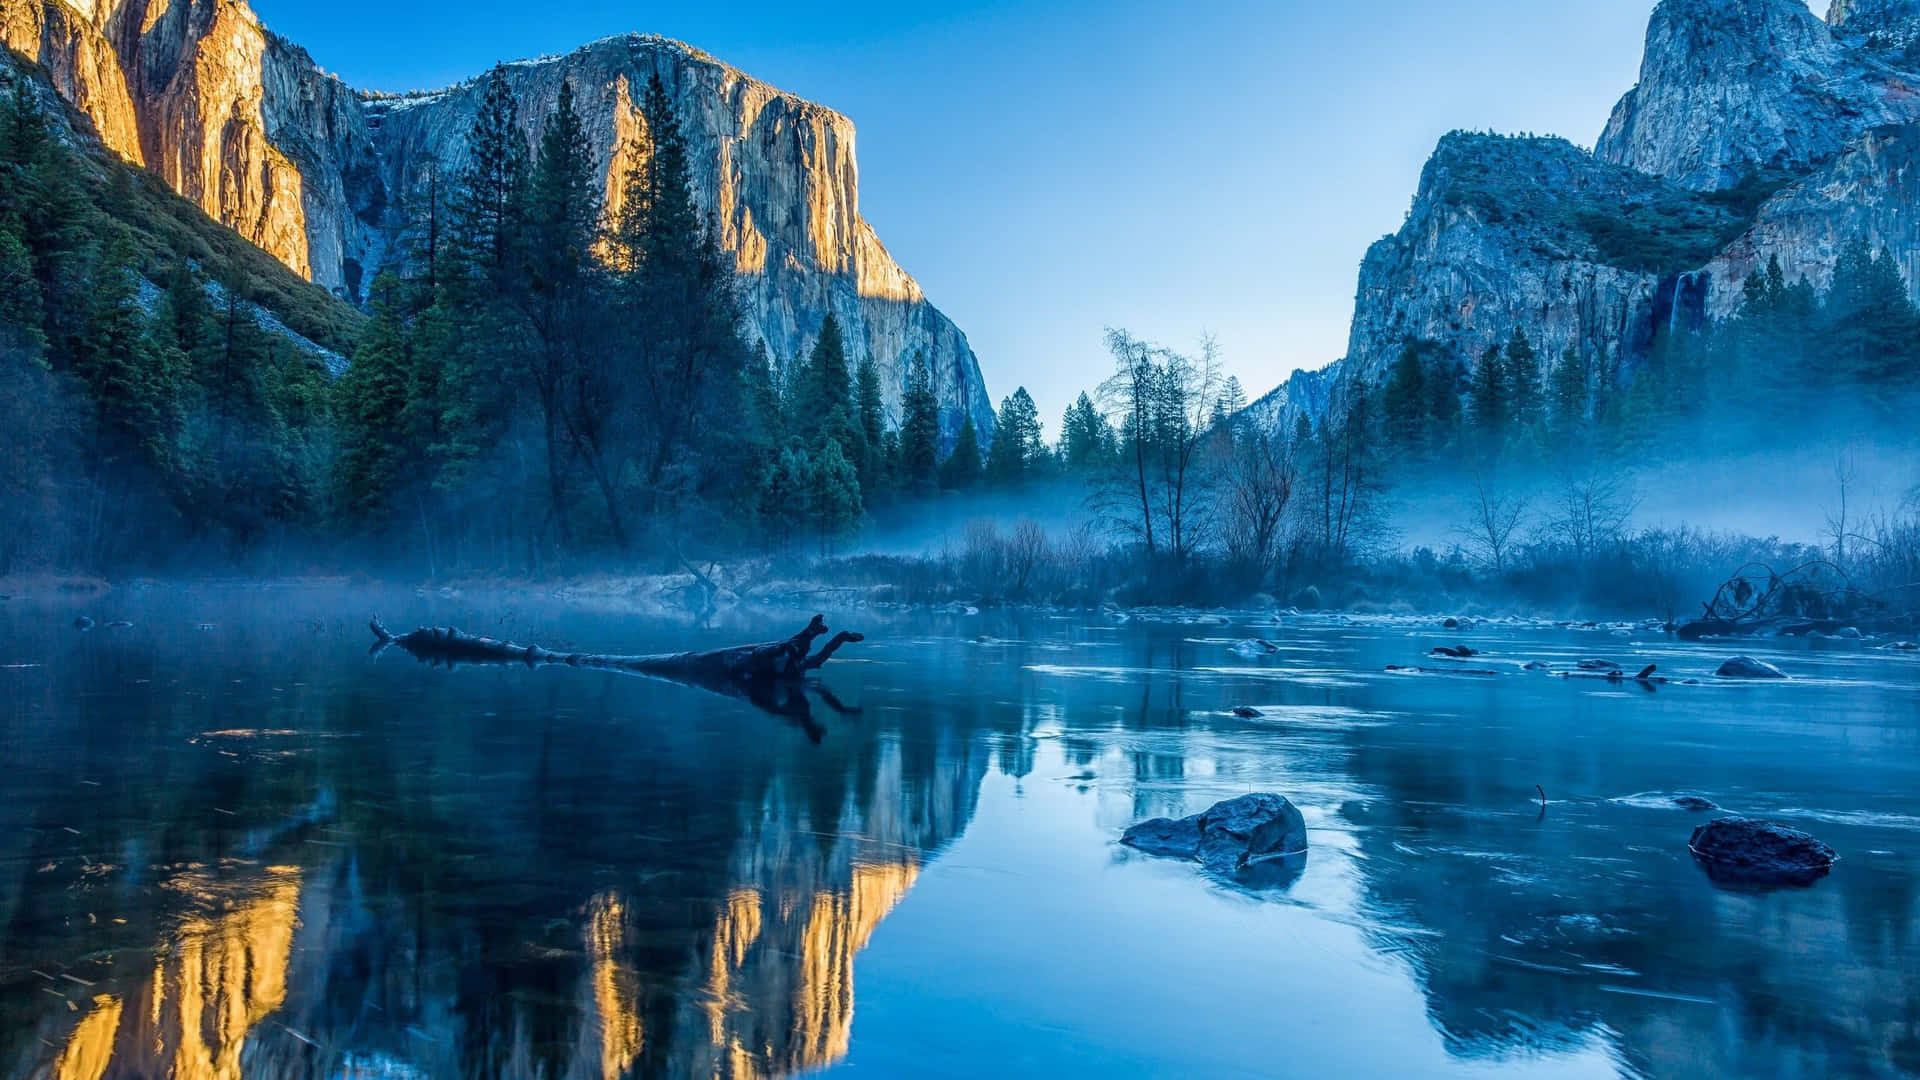 Standing in solitude, the granite rock wall of El Capitan intrigues the viewer. Wallpaper